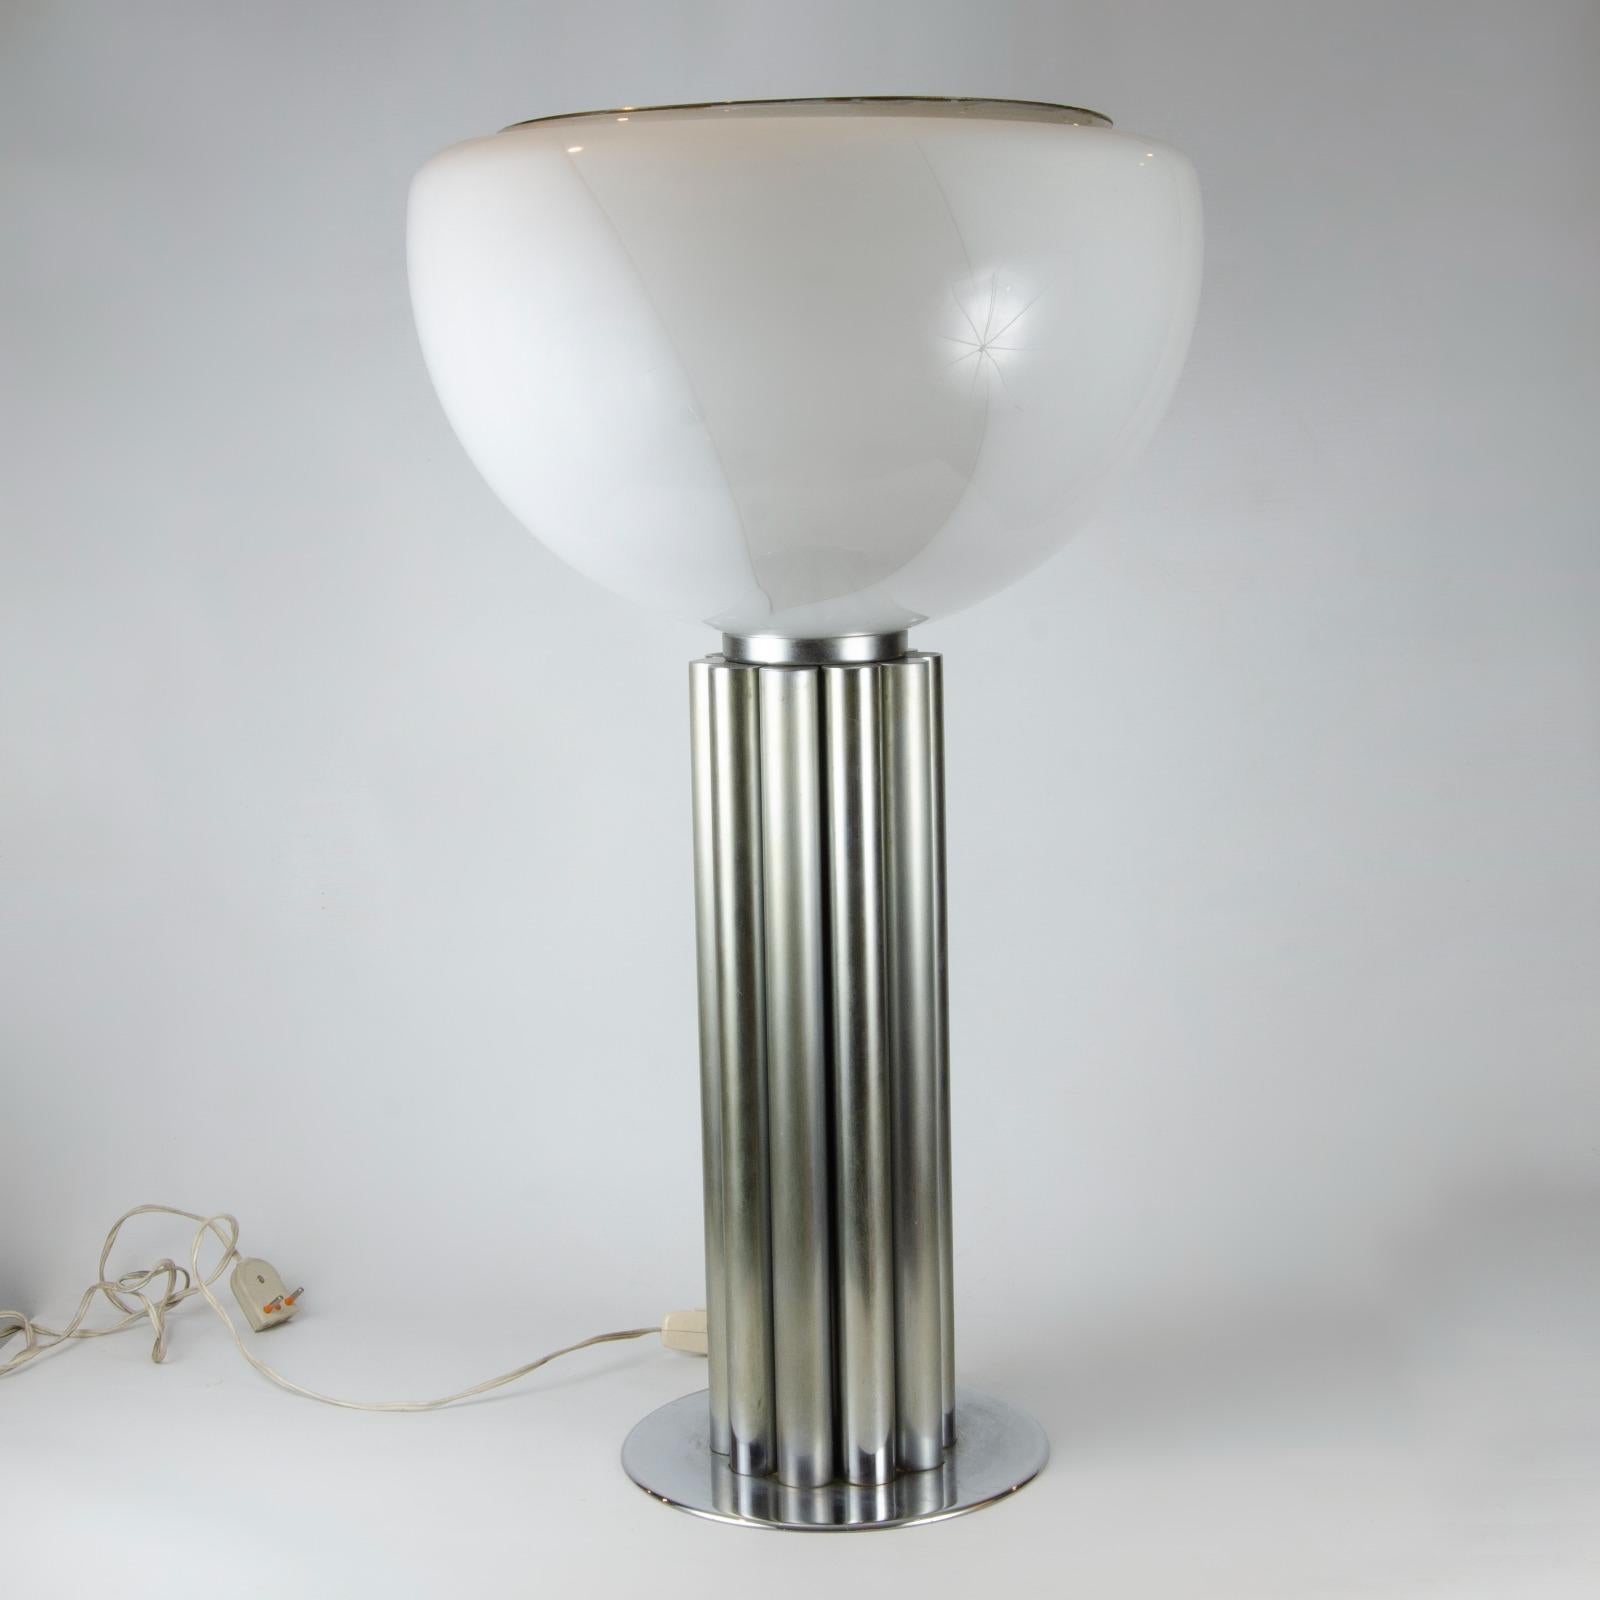 Italian Art Deco table lamp, personalized Torchiere
Beautiful brass and glass lamp, very well made with fitted brass pieces and a high quality glass lid with an opening at the top of the glass, which will allow any bulb power to be used, it has a